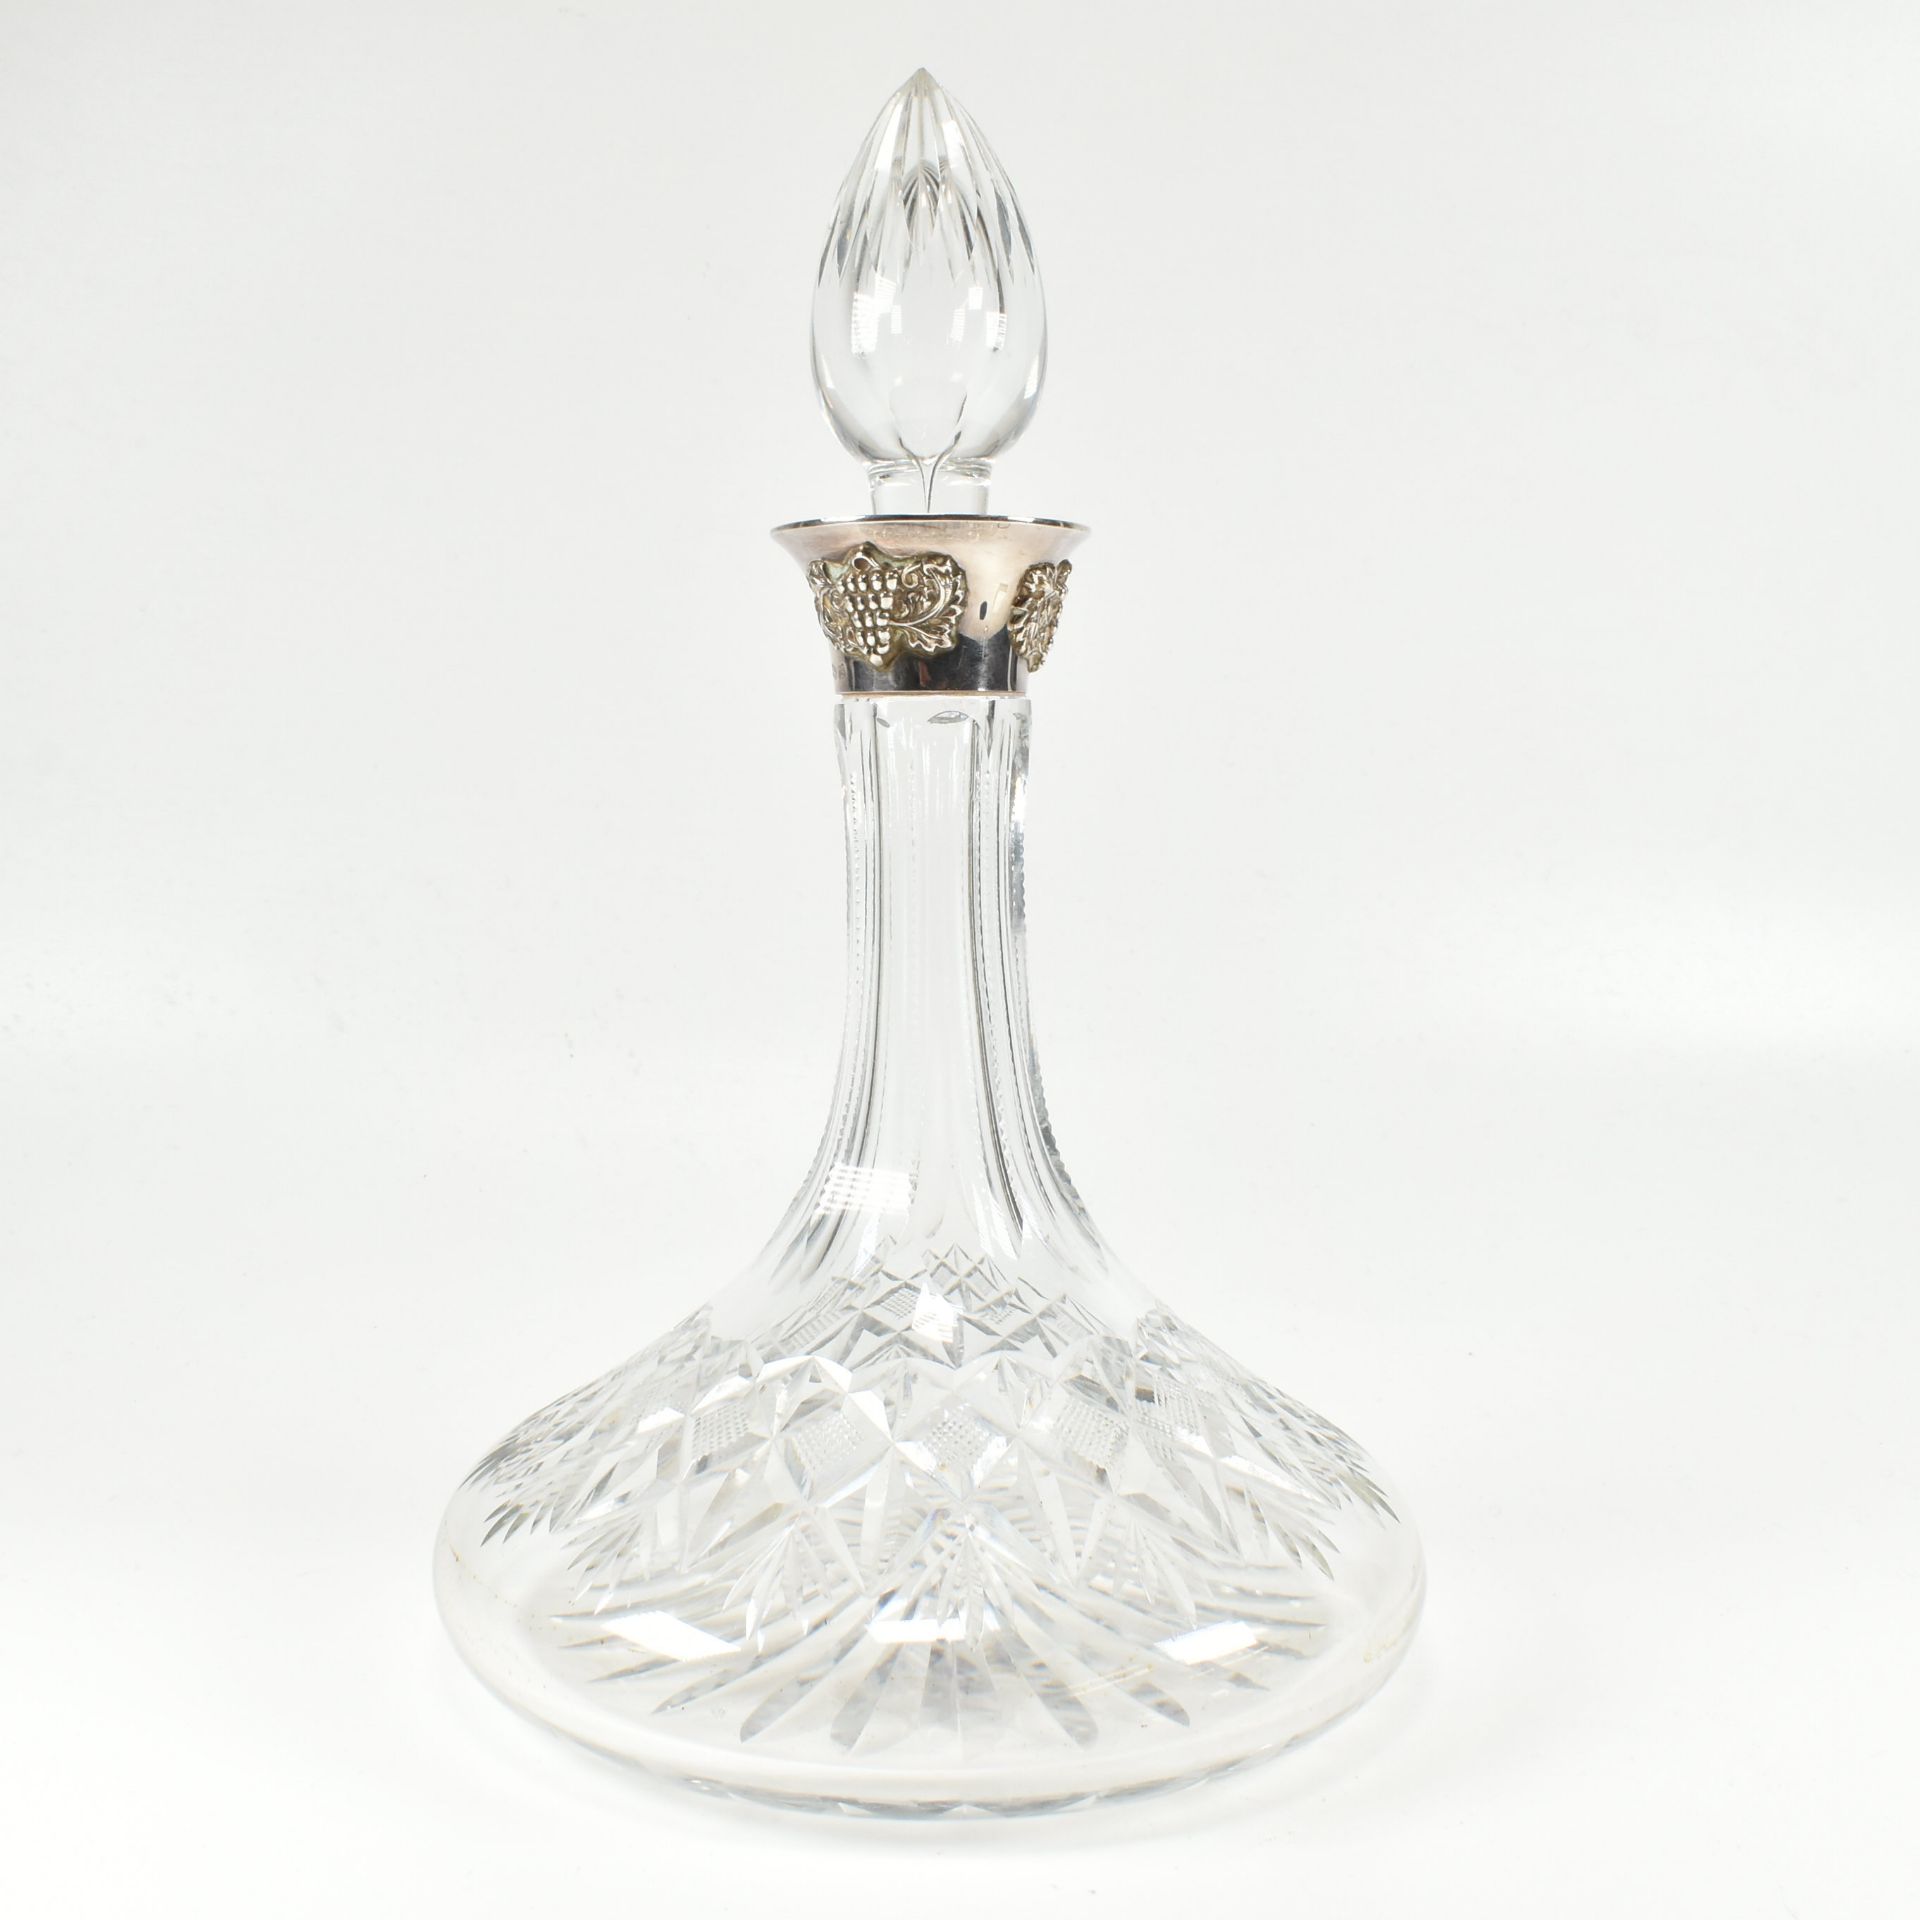 1970S HALLMARKED SILVER MOUNTED CUT GLASS DECANTER - Image 2 of 7